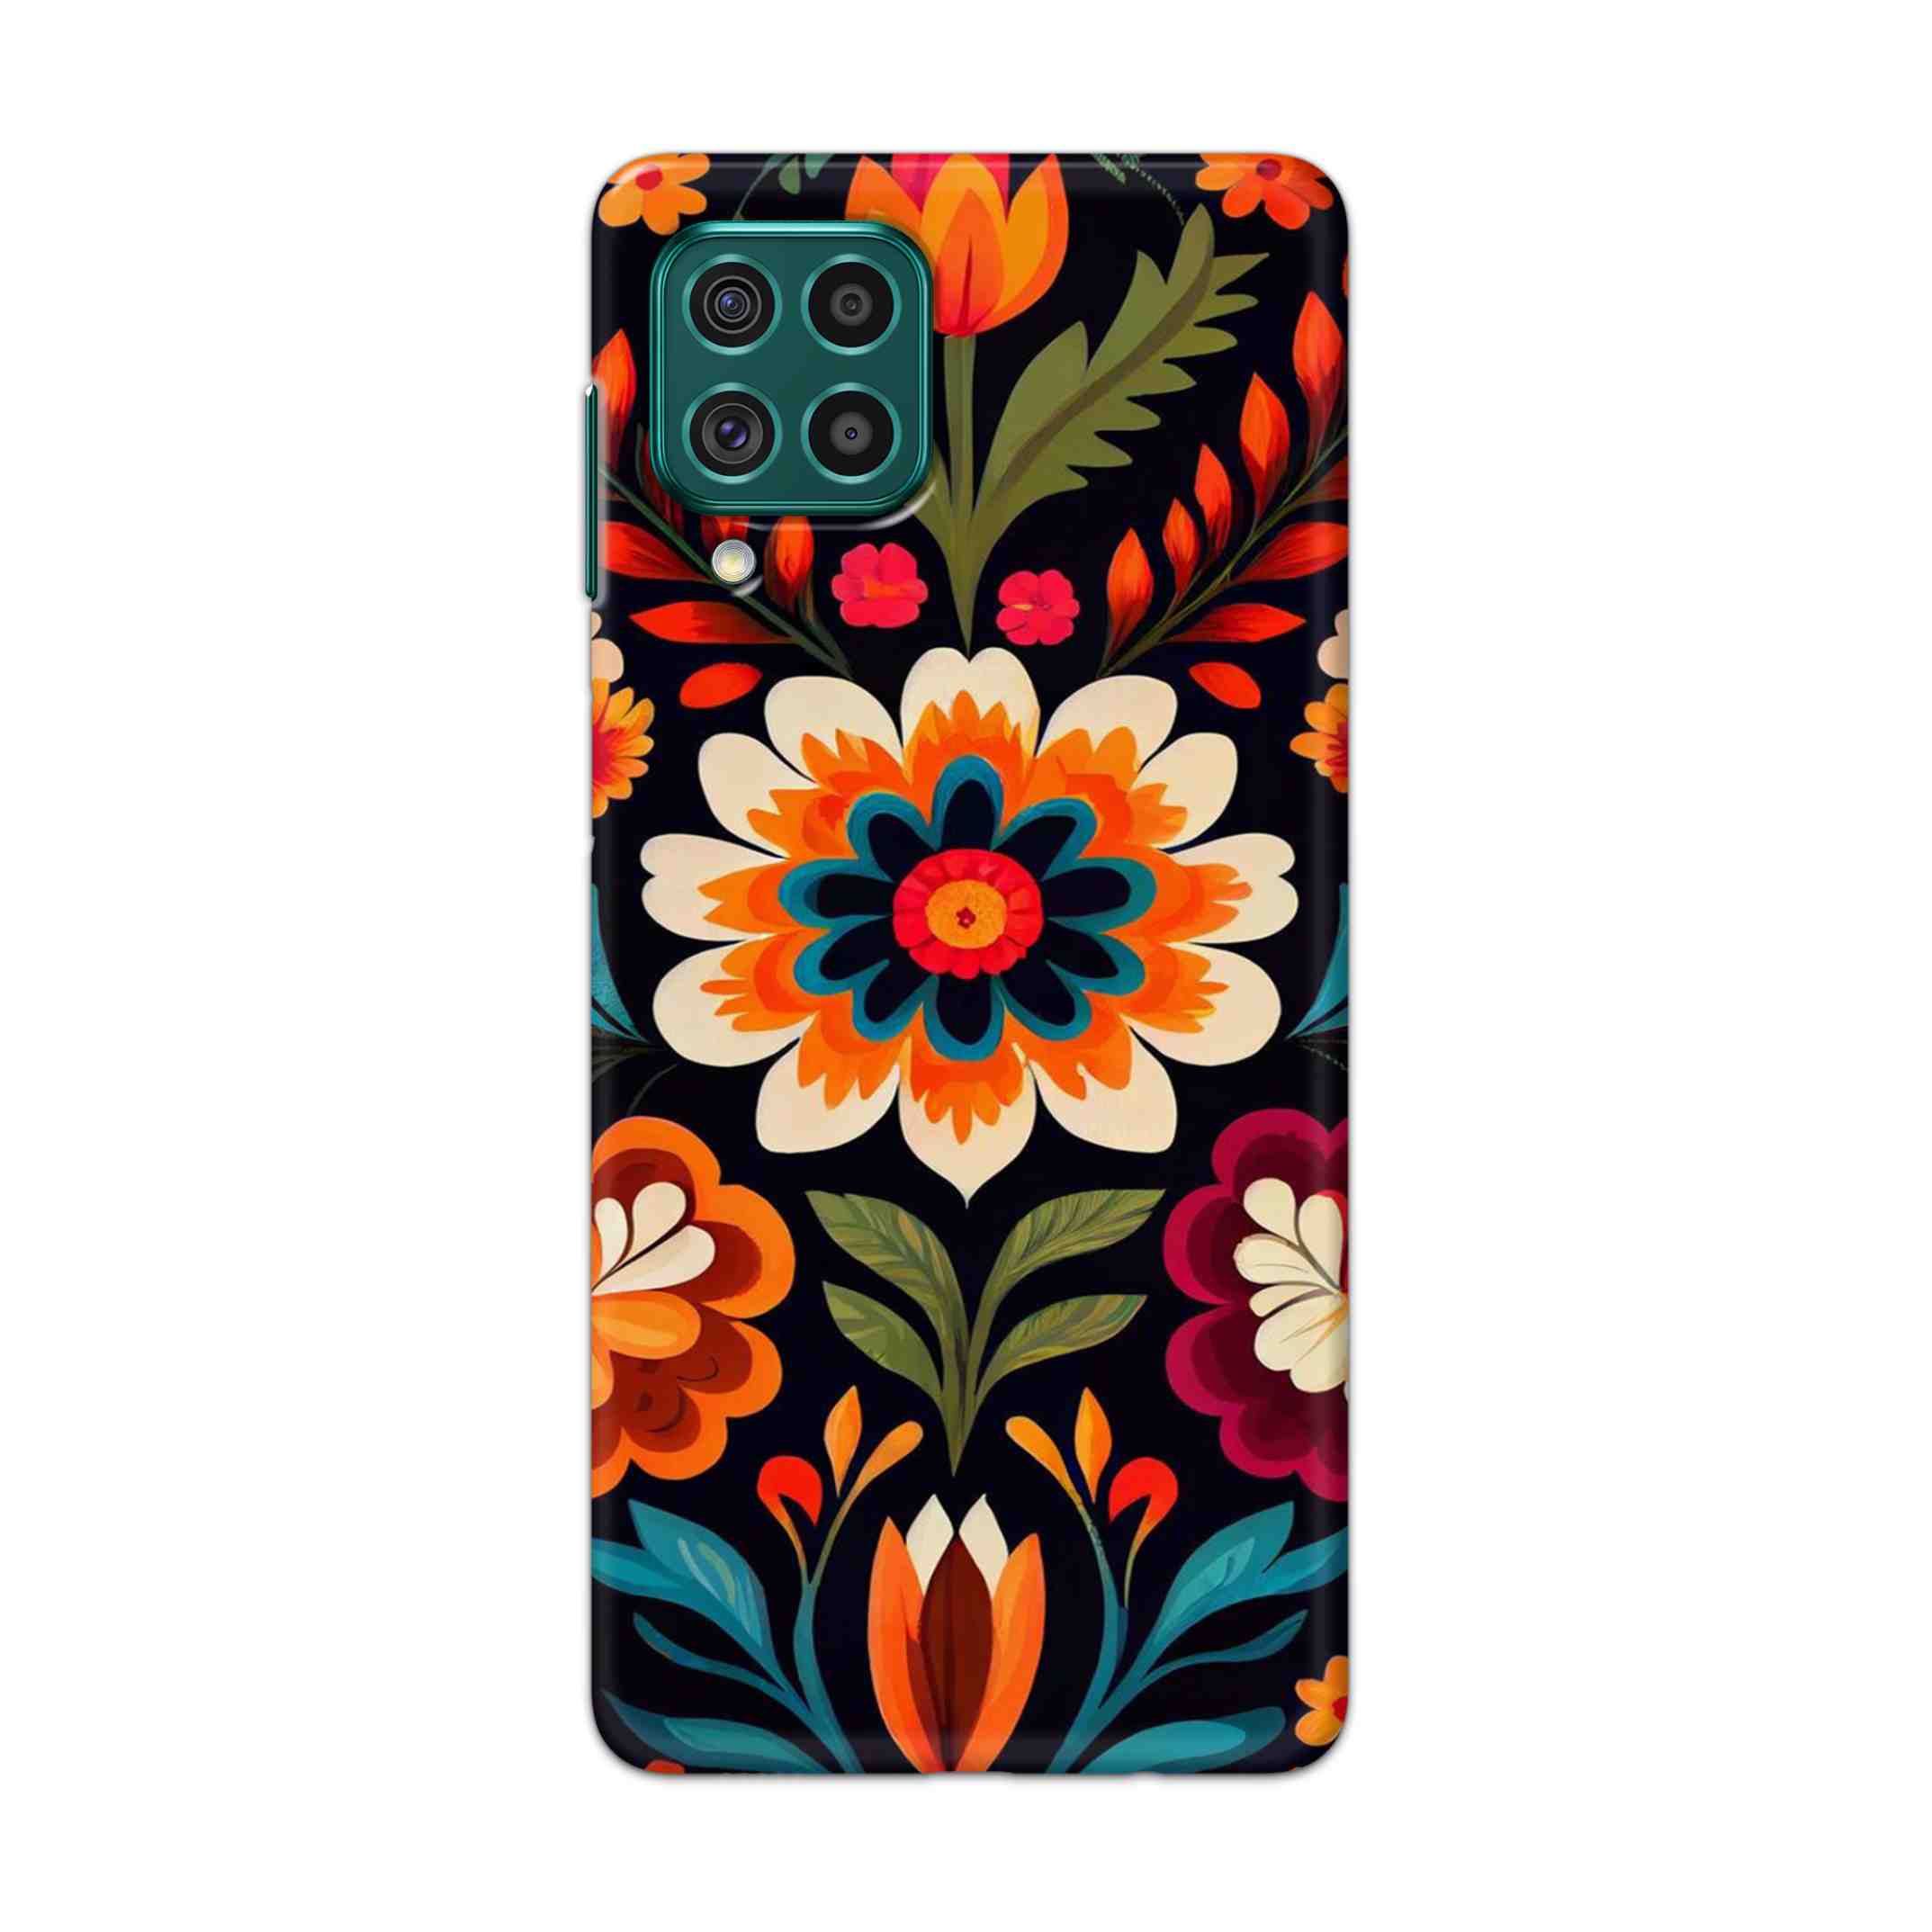 Buy Flower Hard Back Mobile Phone Case Cover For Galaxy F62 Online